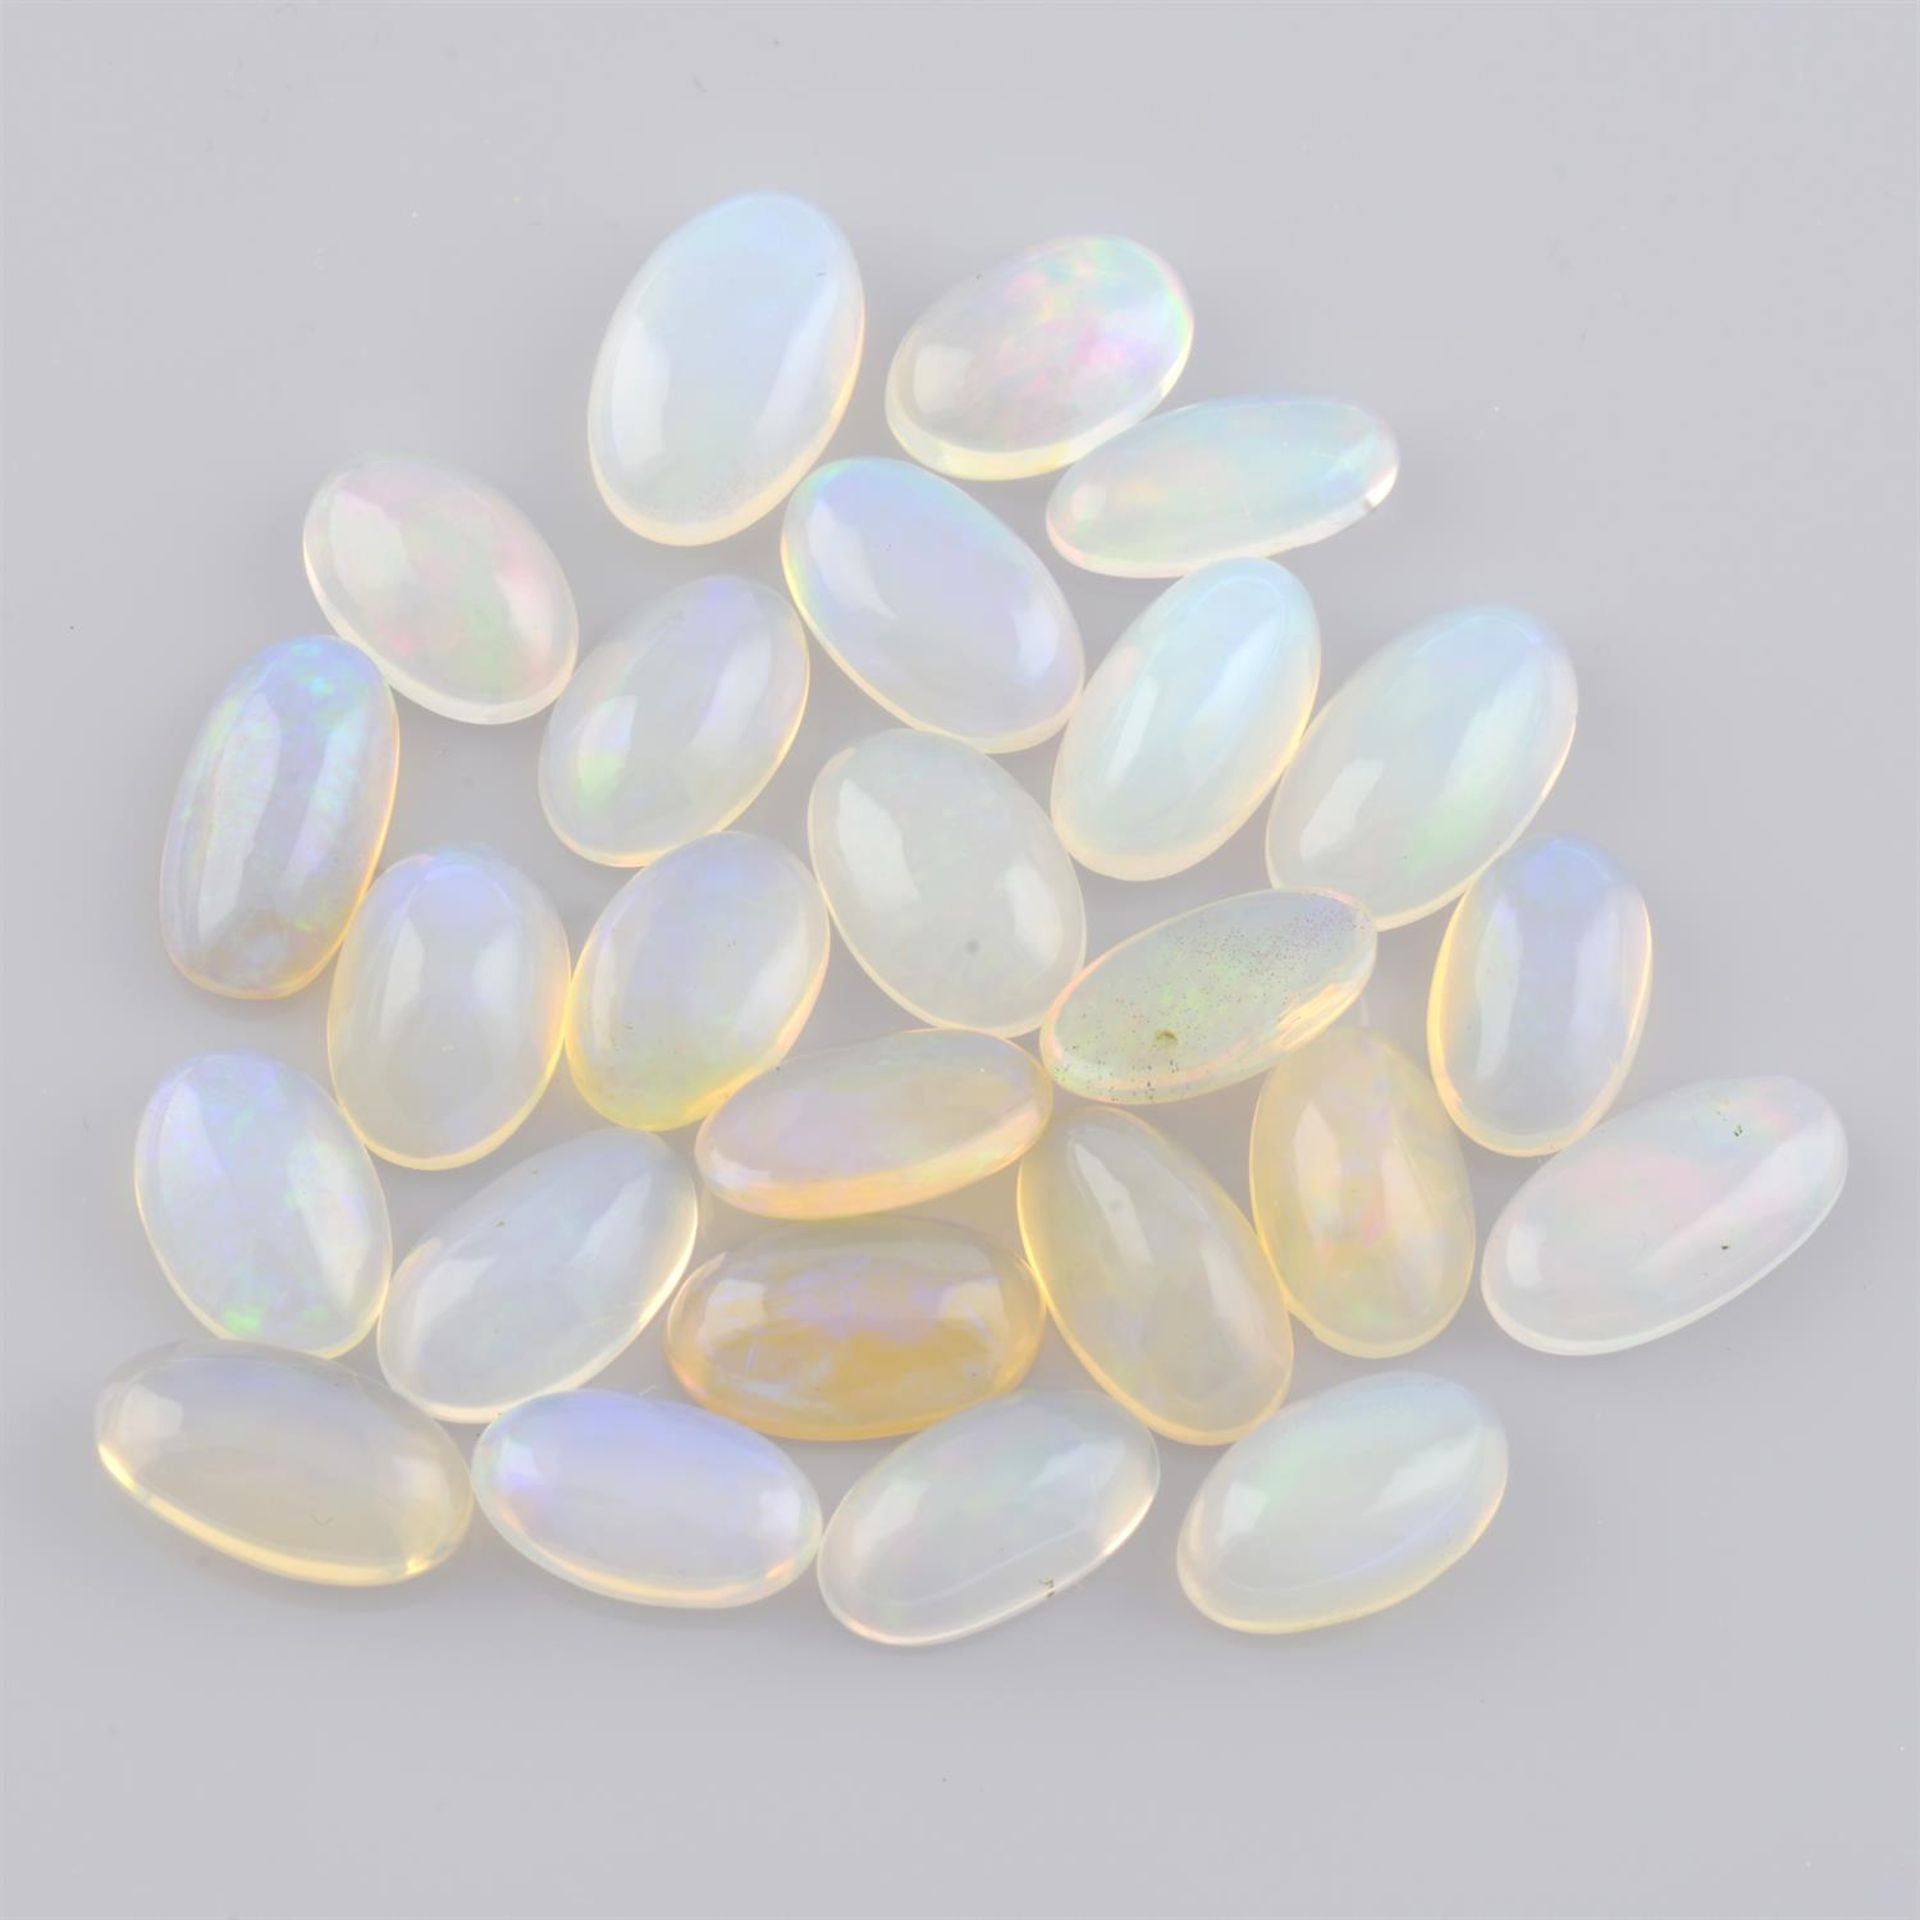 Assorted opal cabochons, 51.47ct